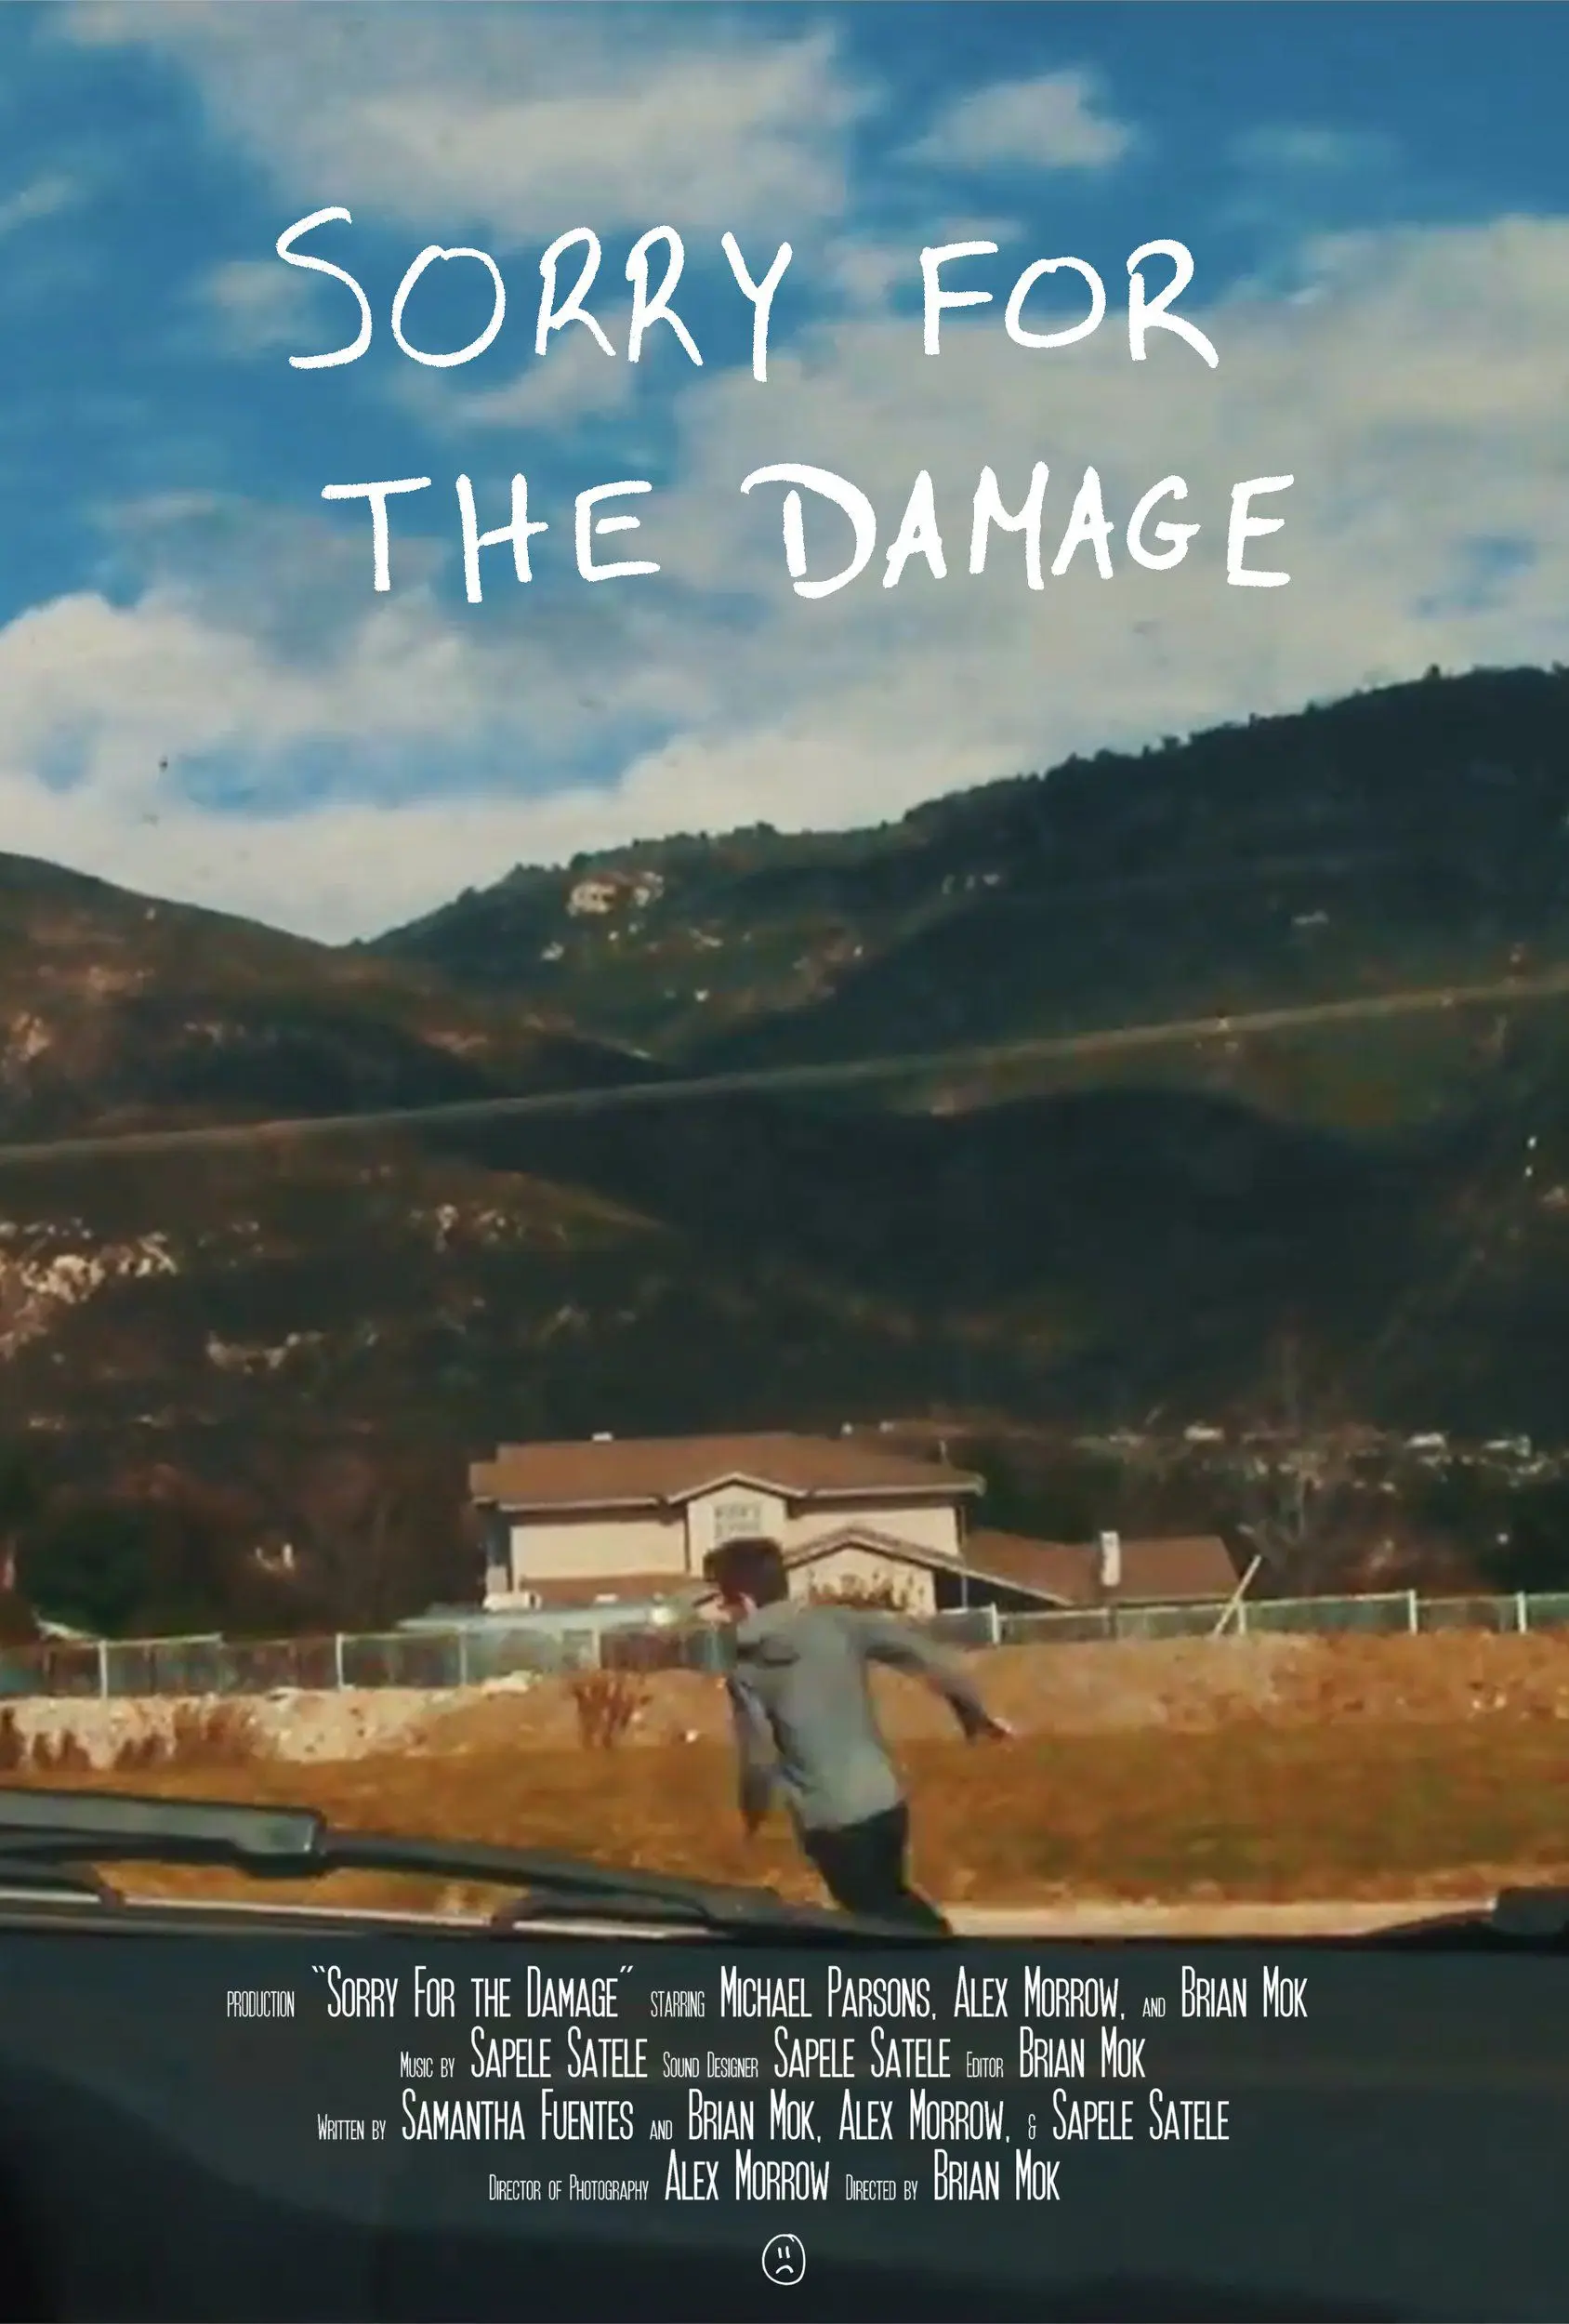 "Sorry For the Damage" film poster. A man runs away from a car that we are in with a house and mountains in the background.